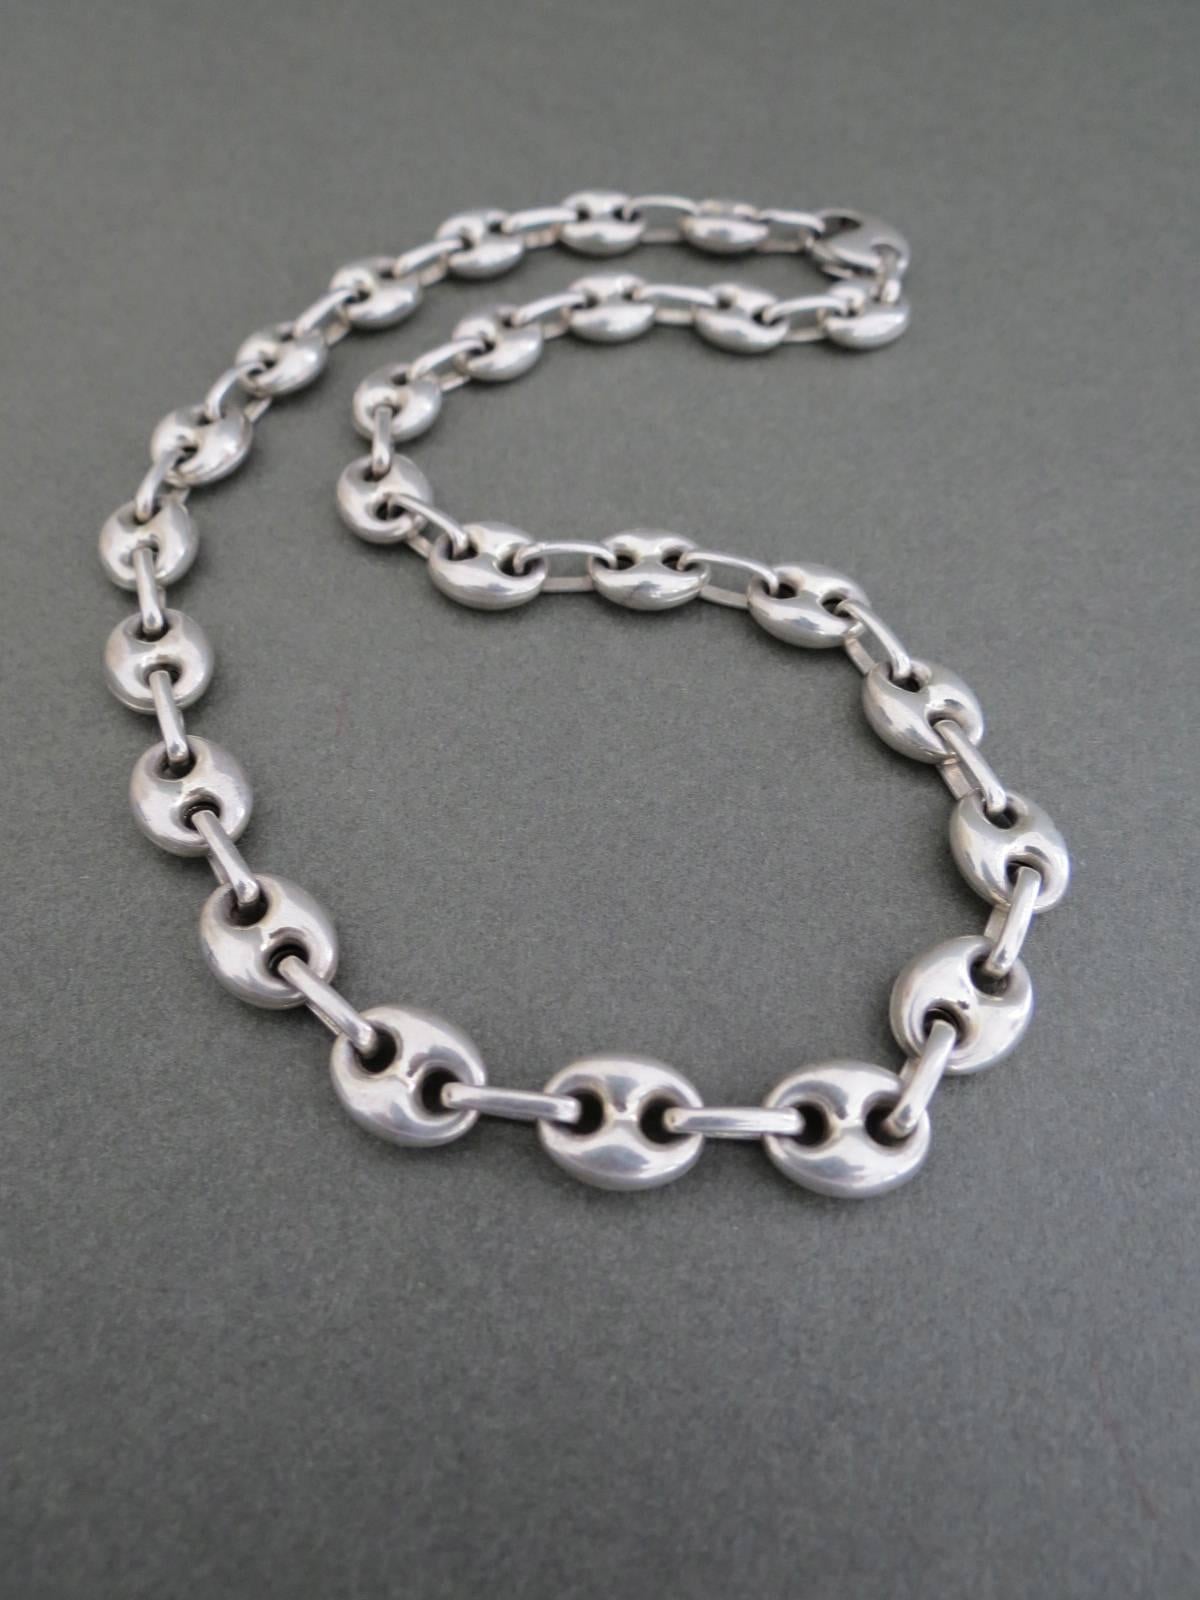 Vintage Large Sterling Silver Danish Chain Link Necklace.
Item Specifics
Length: 42cm (approx 16.50